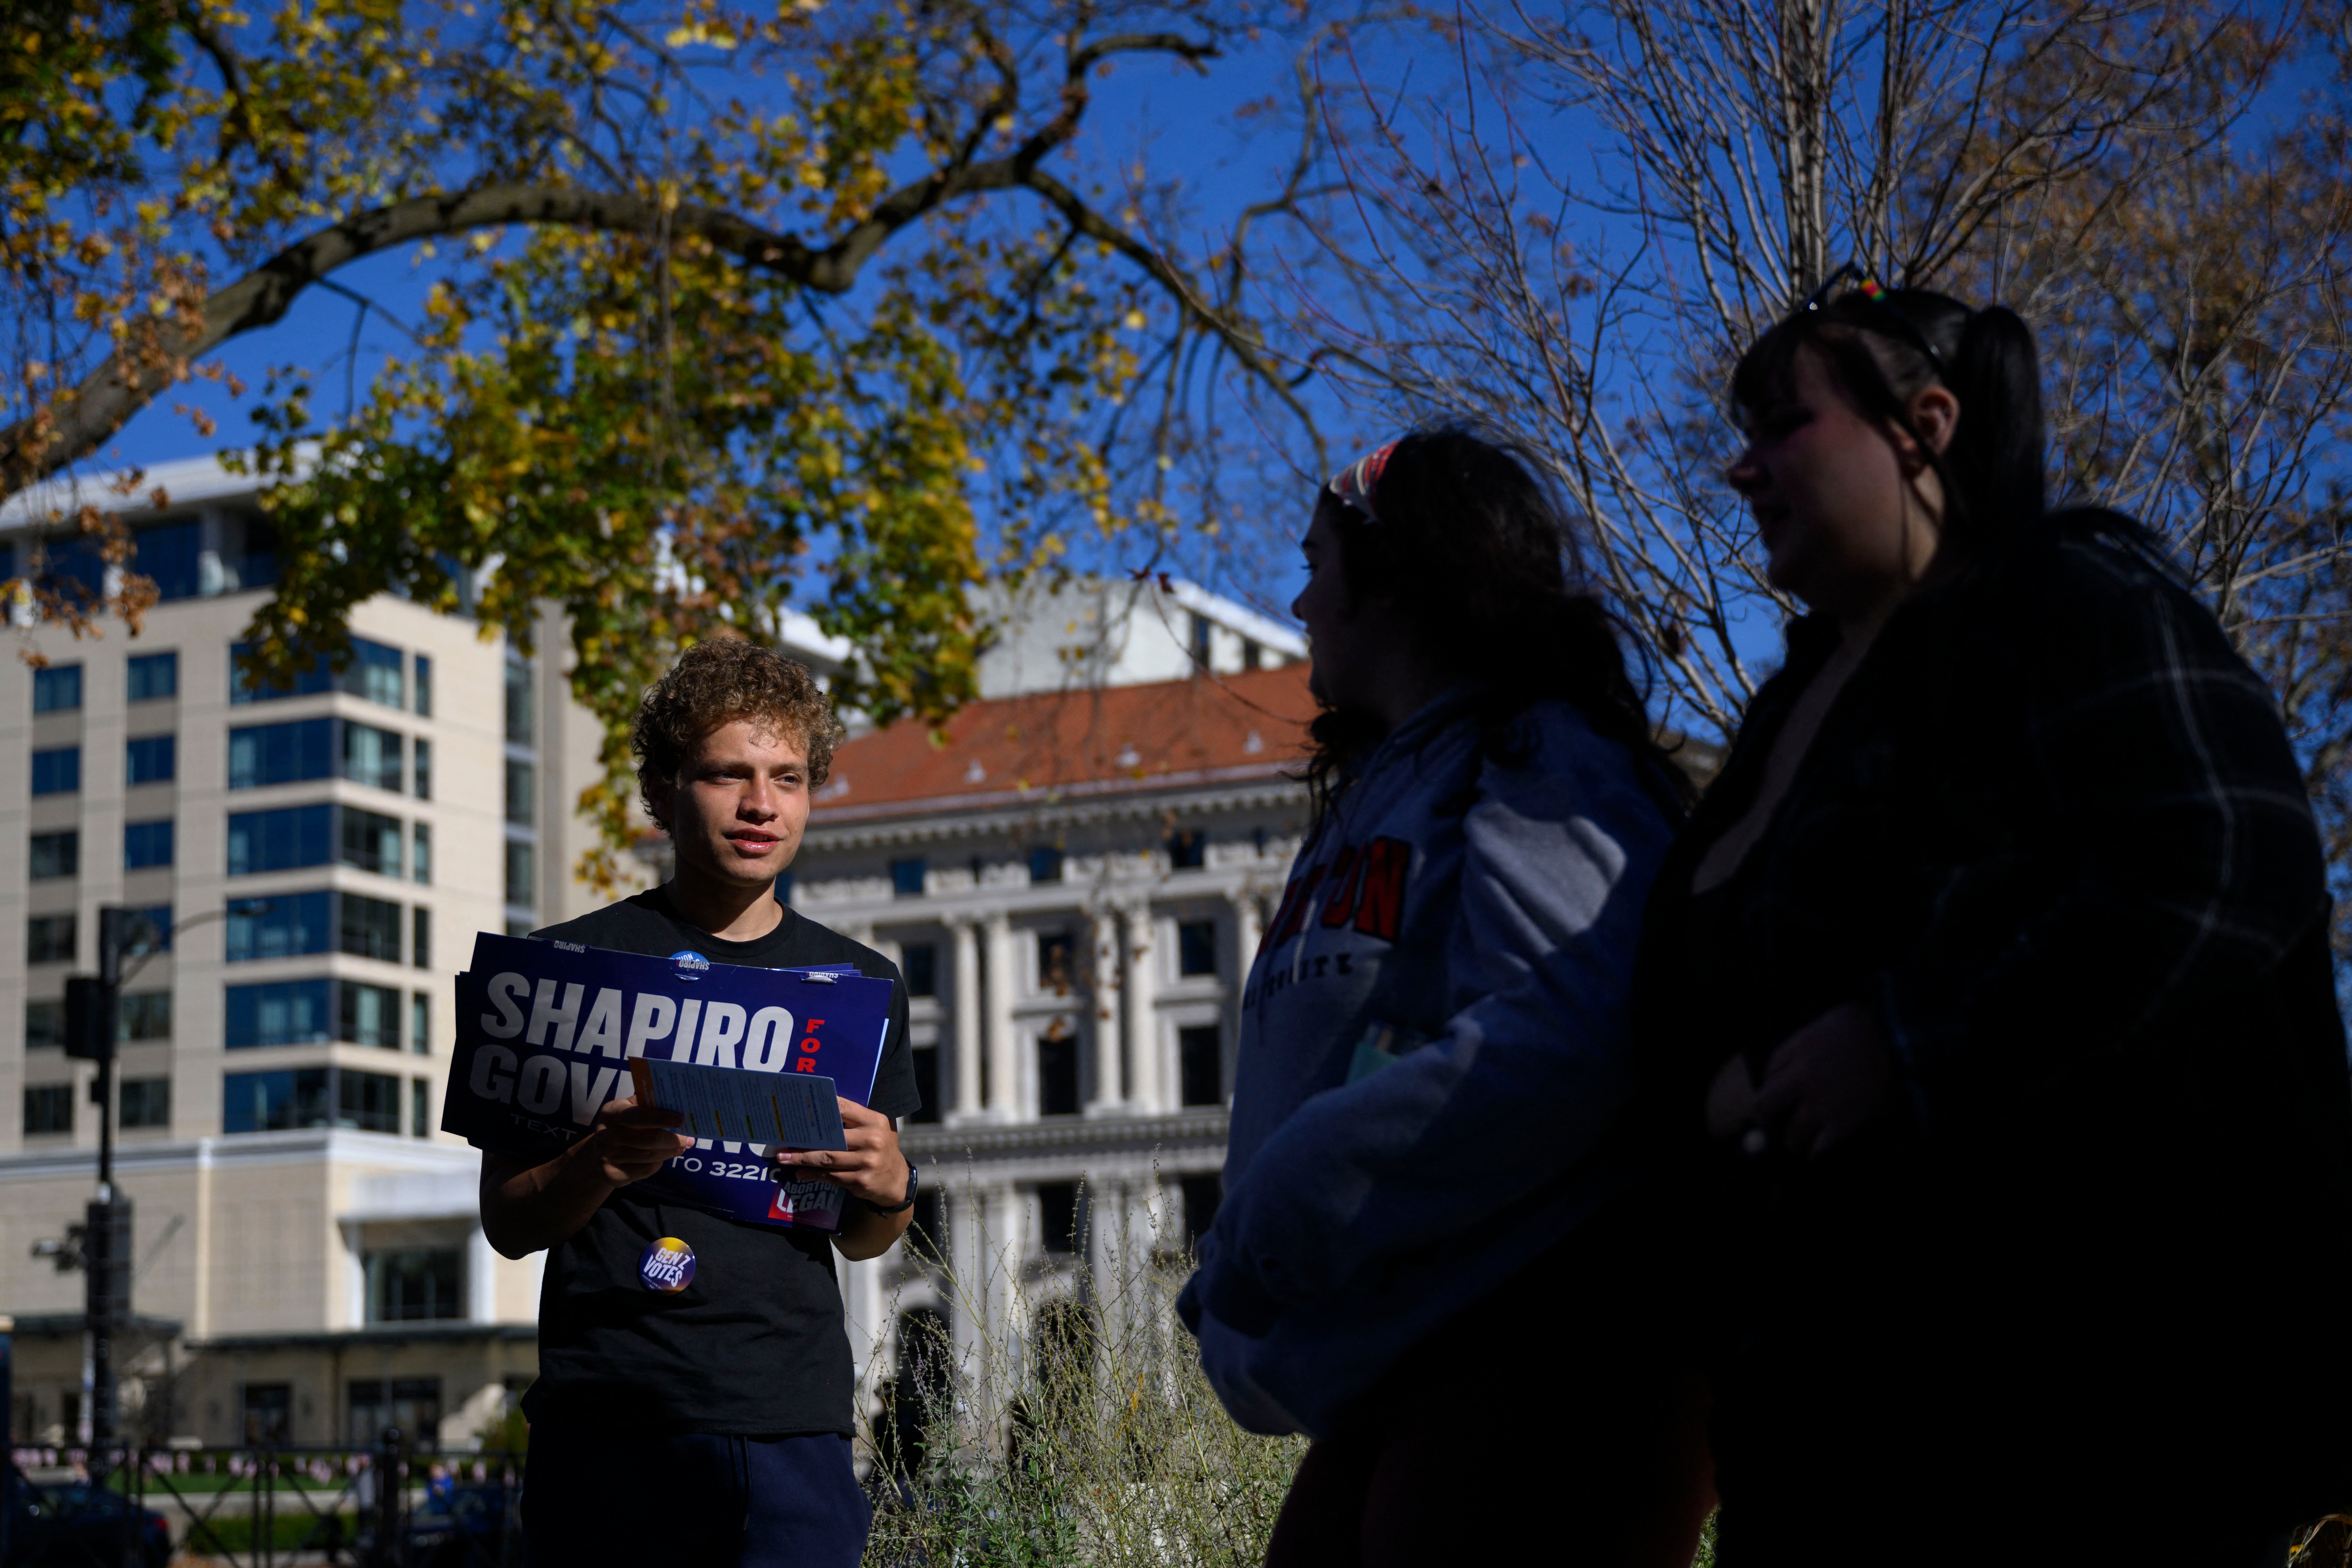 A young man holds a "Shapiro for Governor" sign as he speaks to two young women in front of a tree branch and buildings in Pittsburgh.